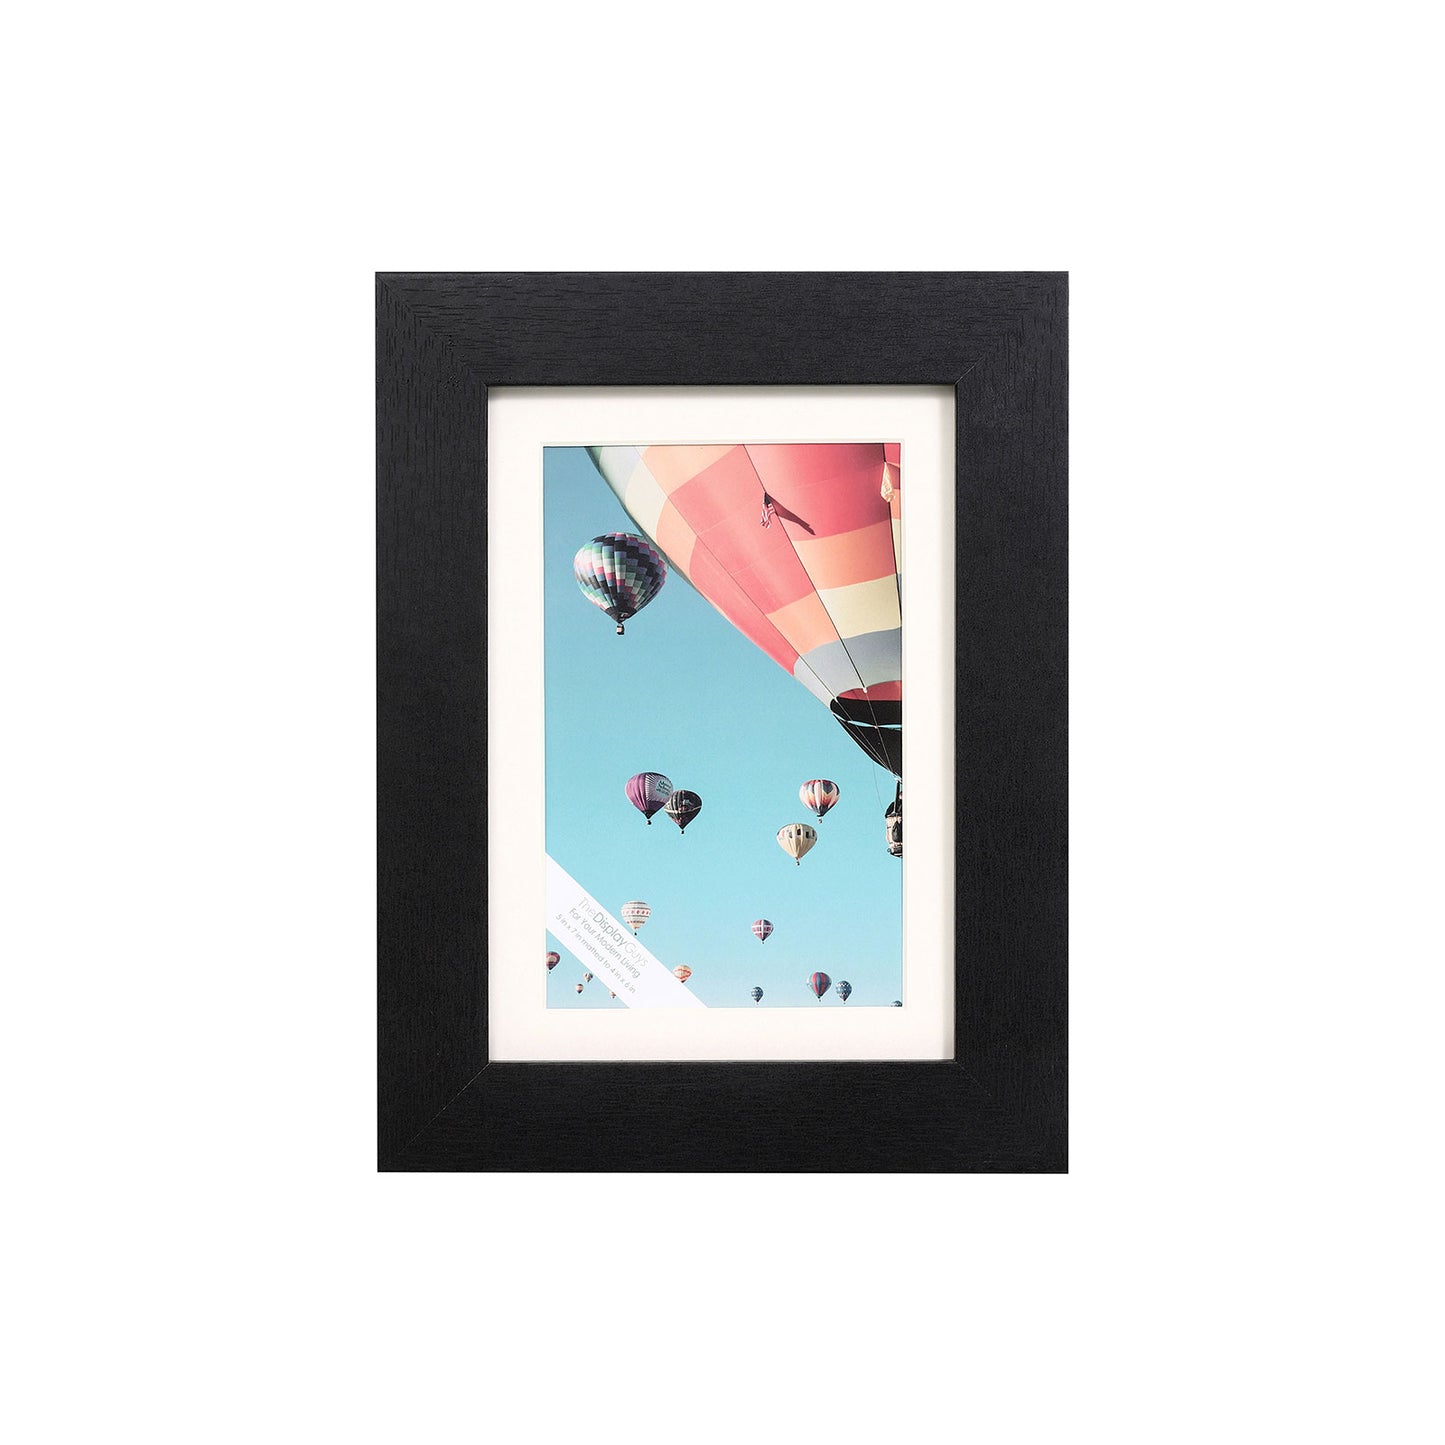 5" x 7" Black MDF Wood Picture Frame with Tempered Glass, 4" x 6" Matted